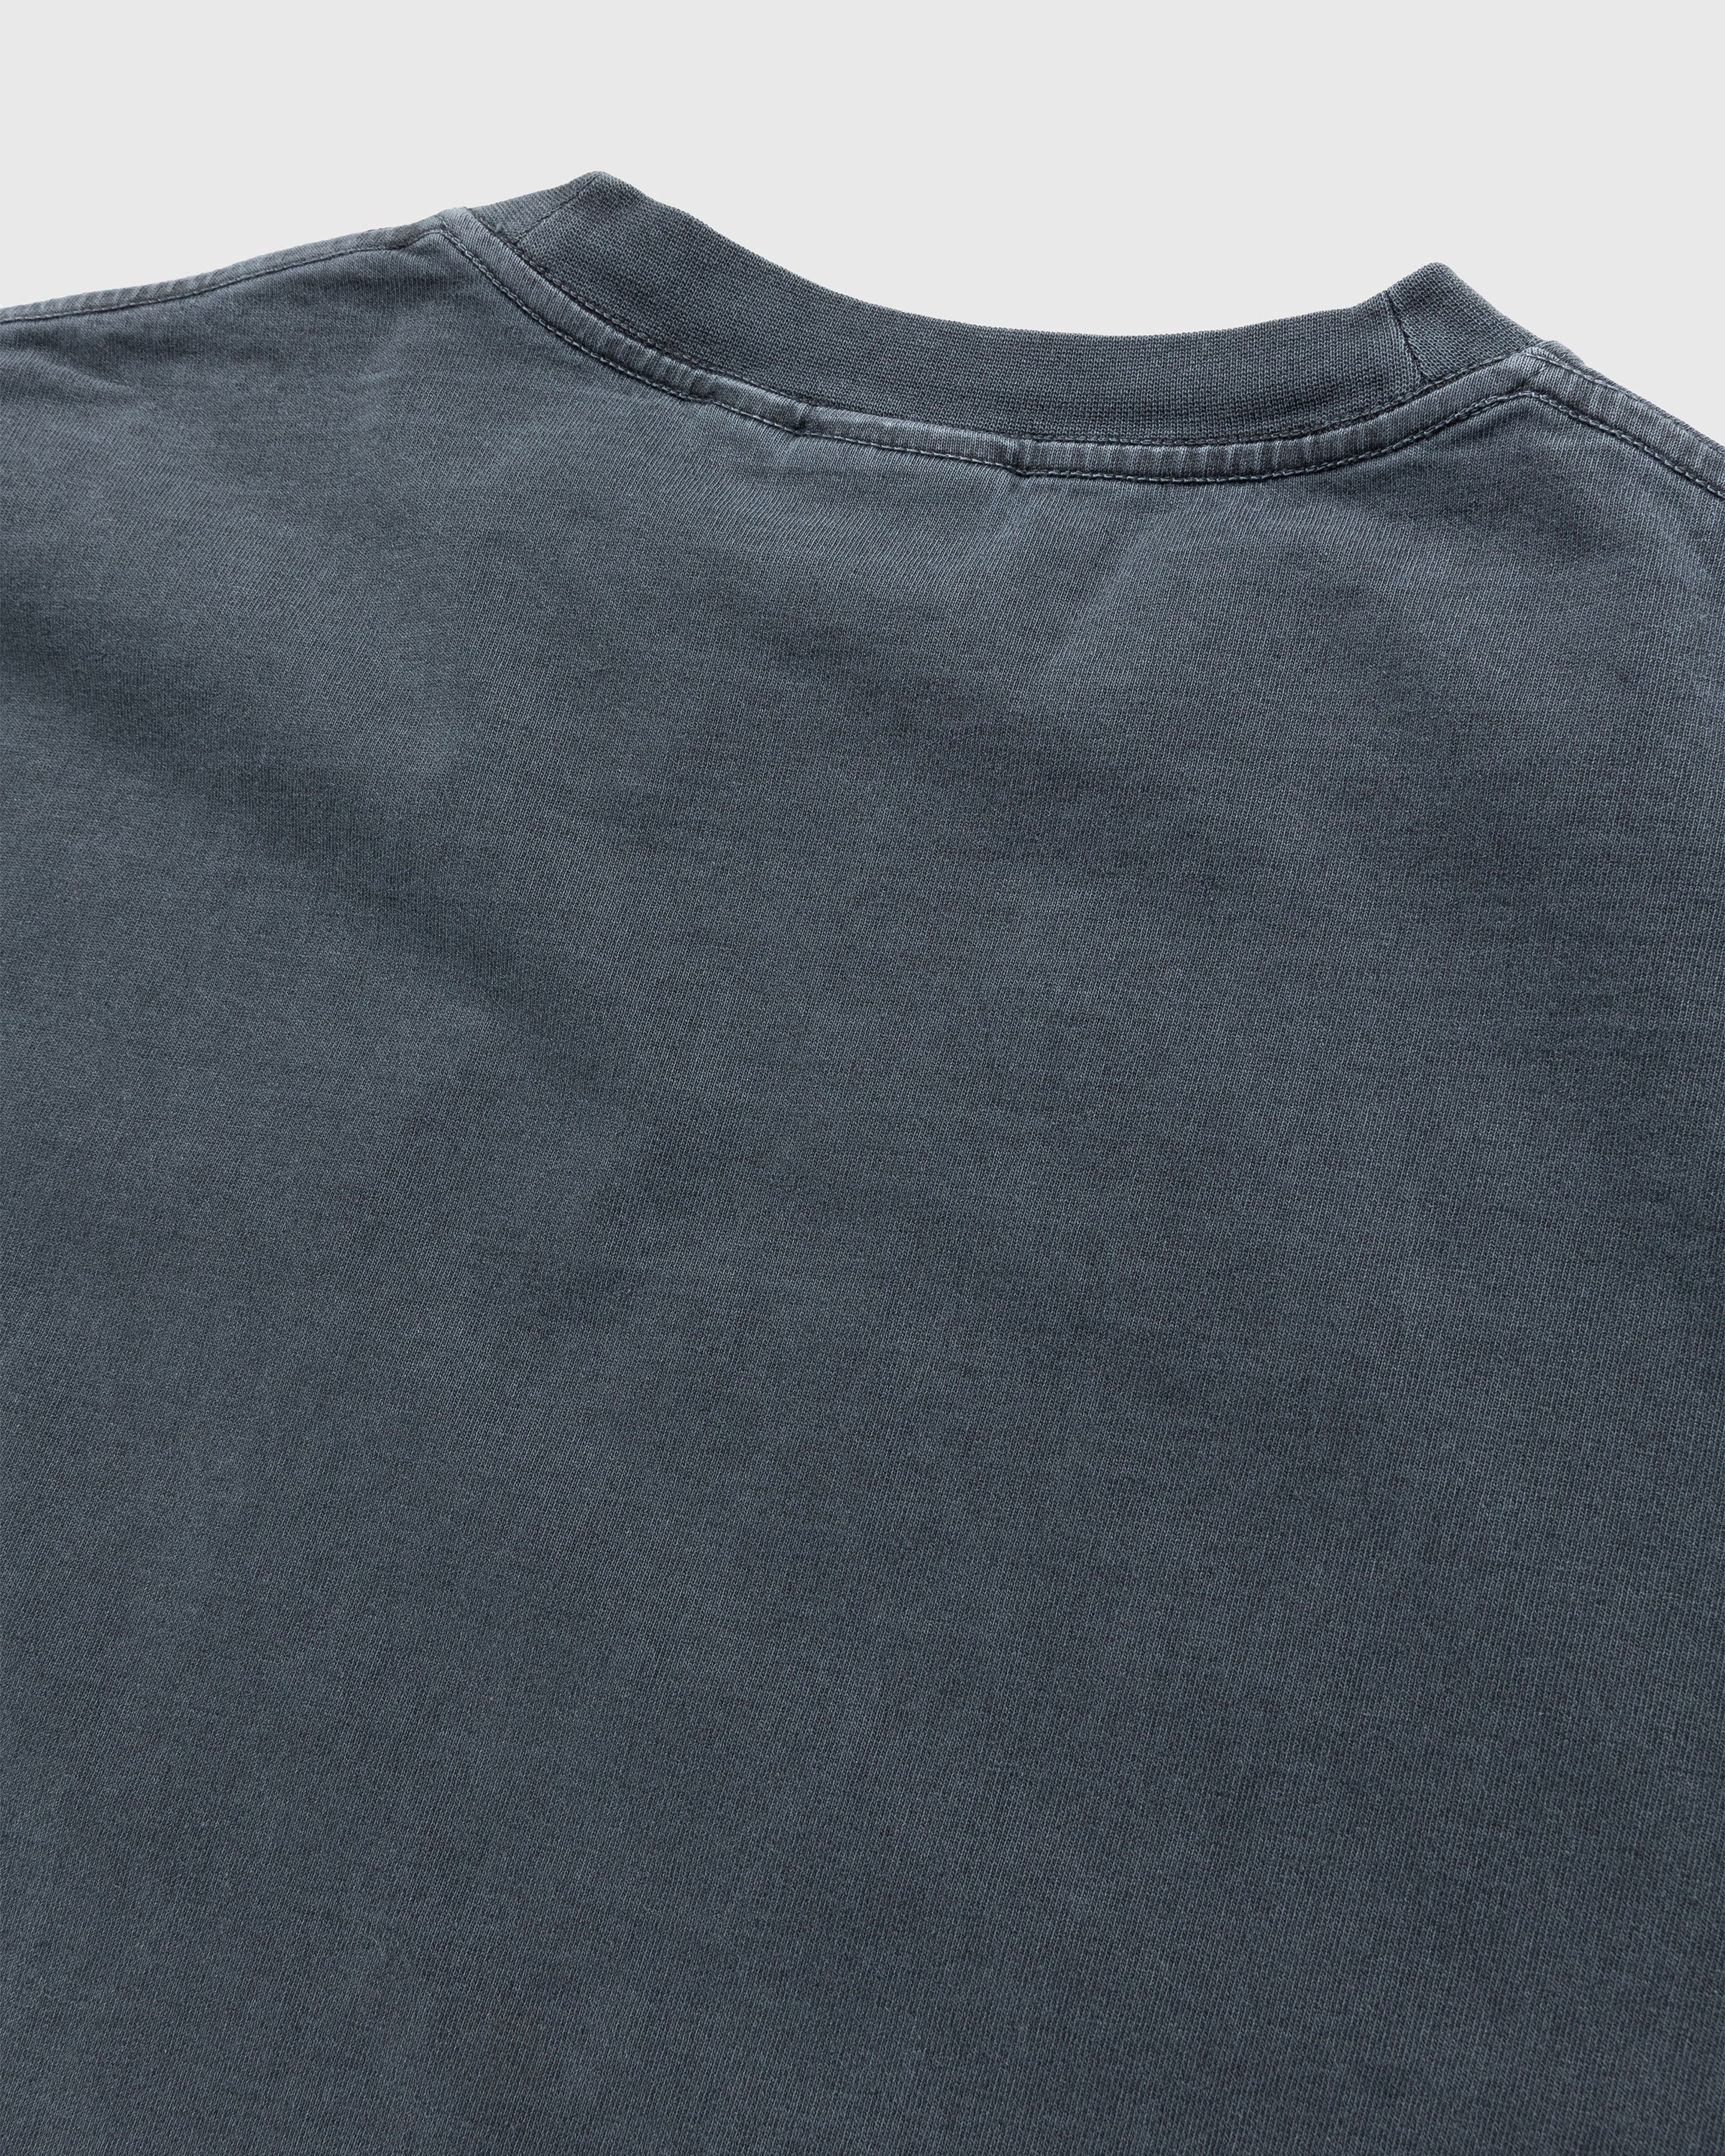 Gramicci - One Point Tee Grey Pigment - Clothing - Grey - Image 5